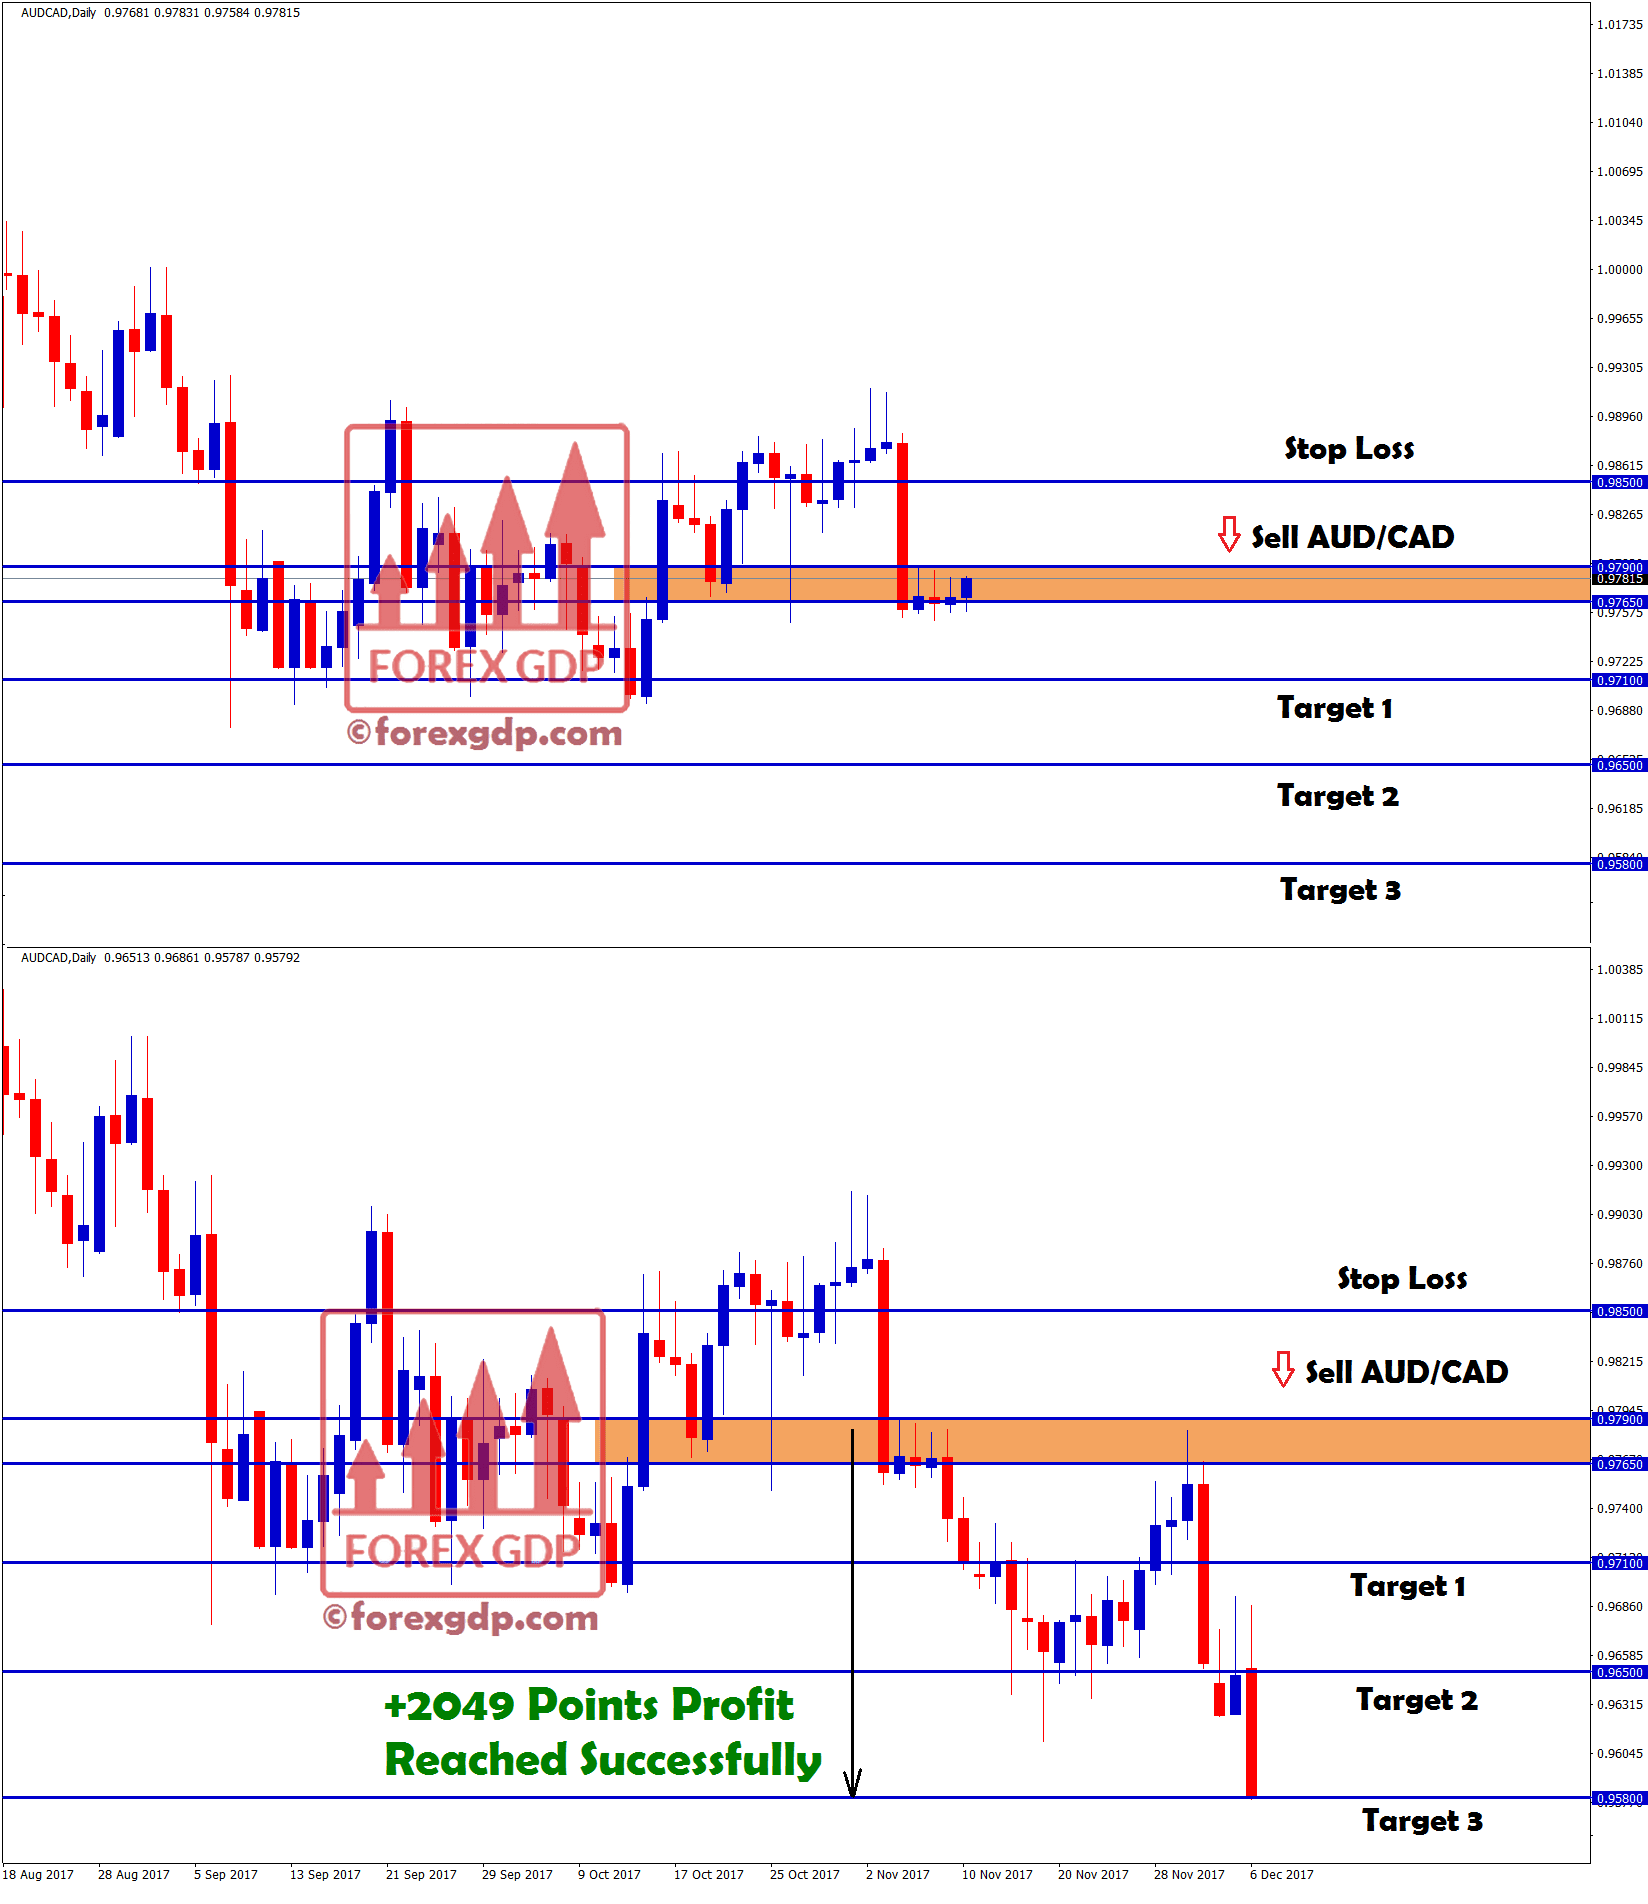 3rd target hits with +2049 points profit in aud cad sell signal